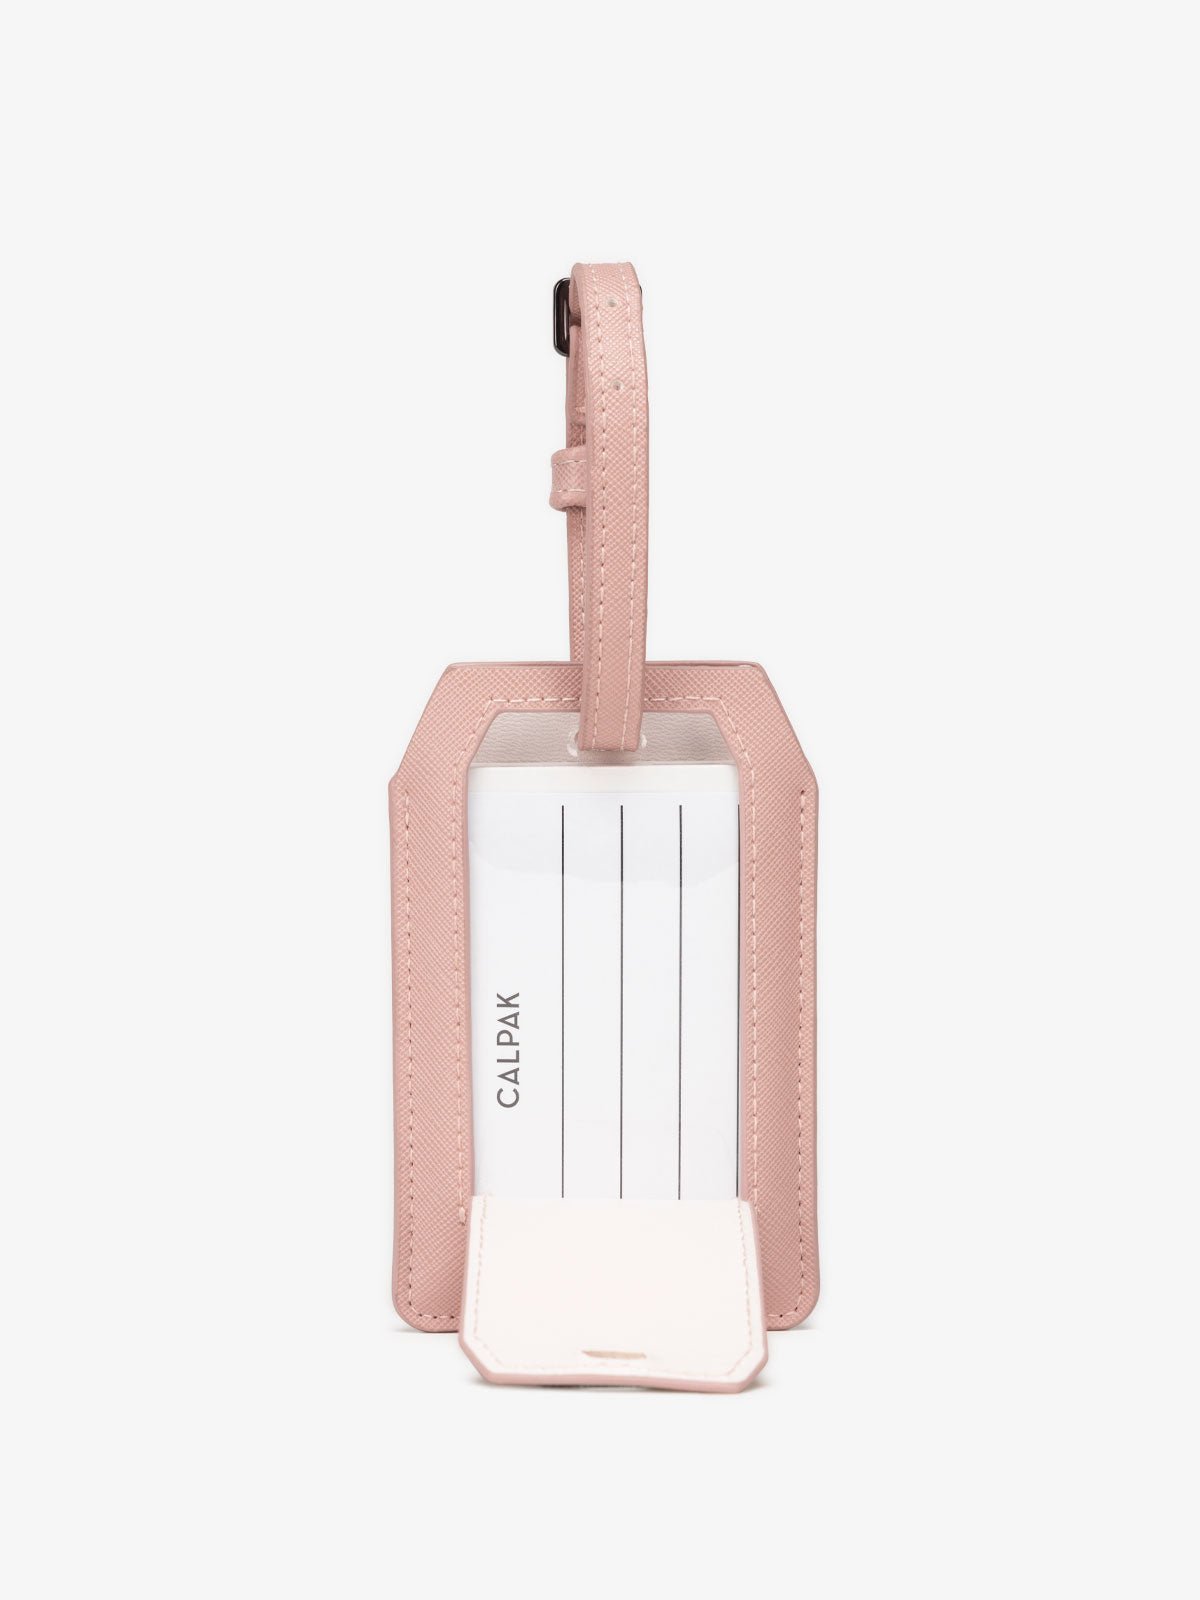 pink CALPAK luggage tag with portable travel charger